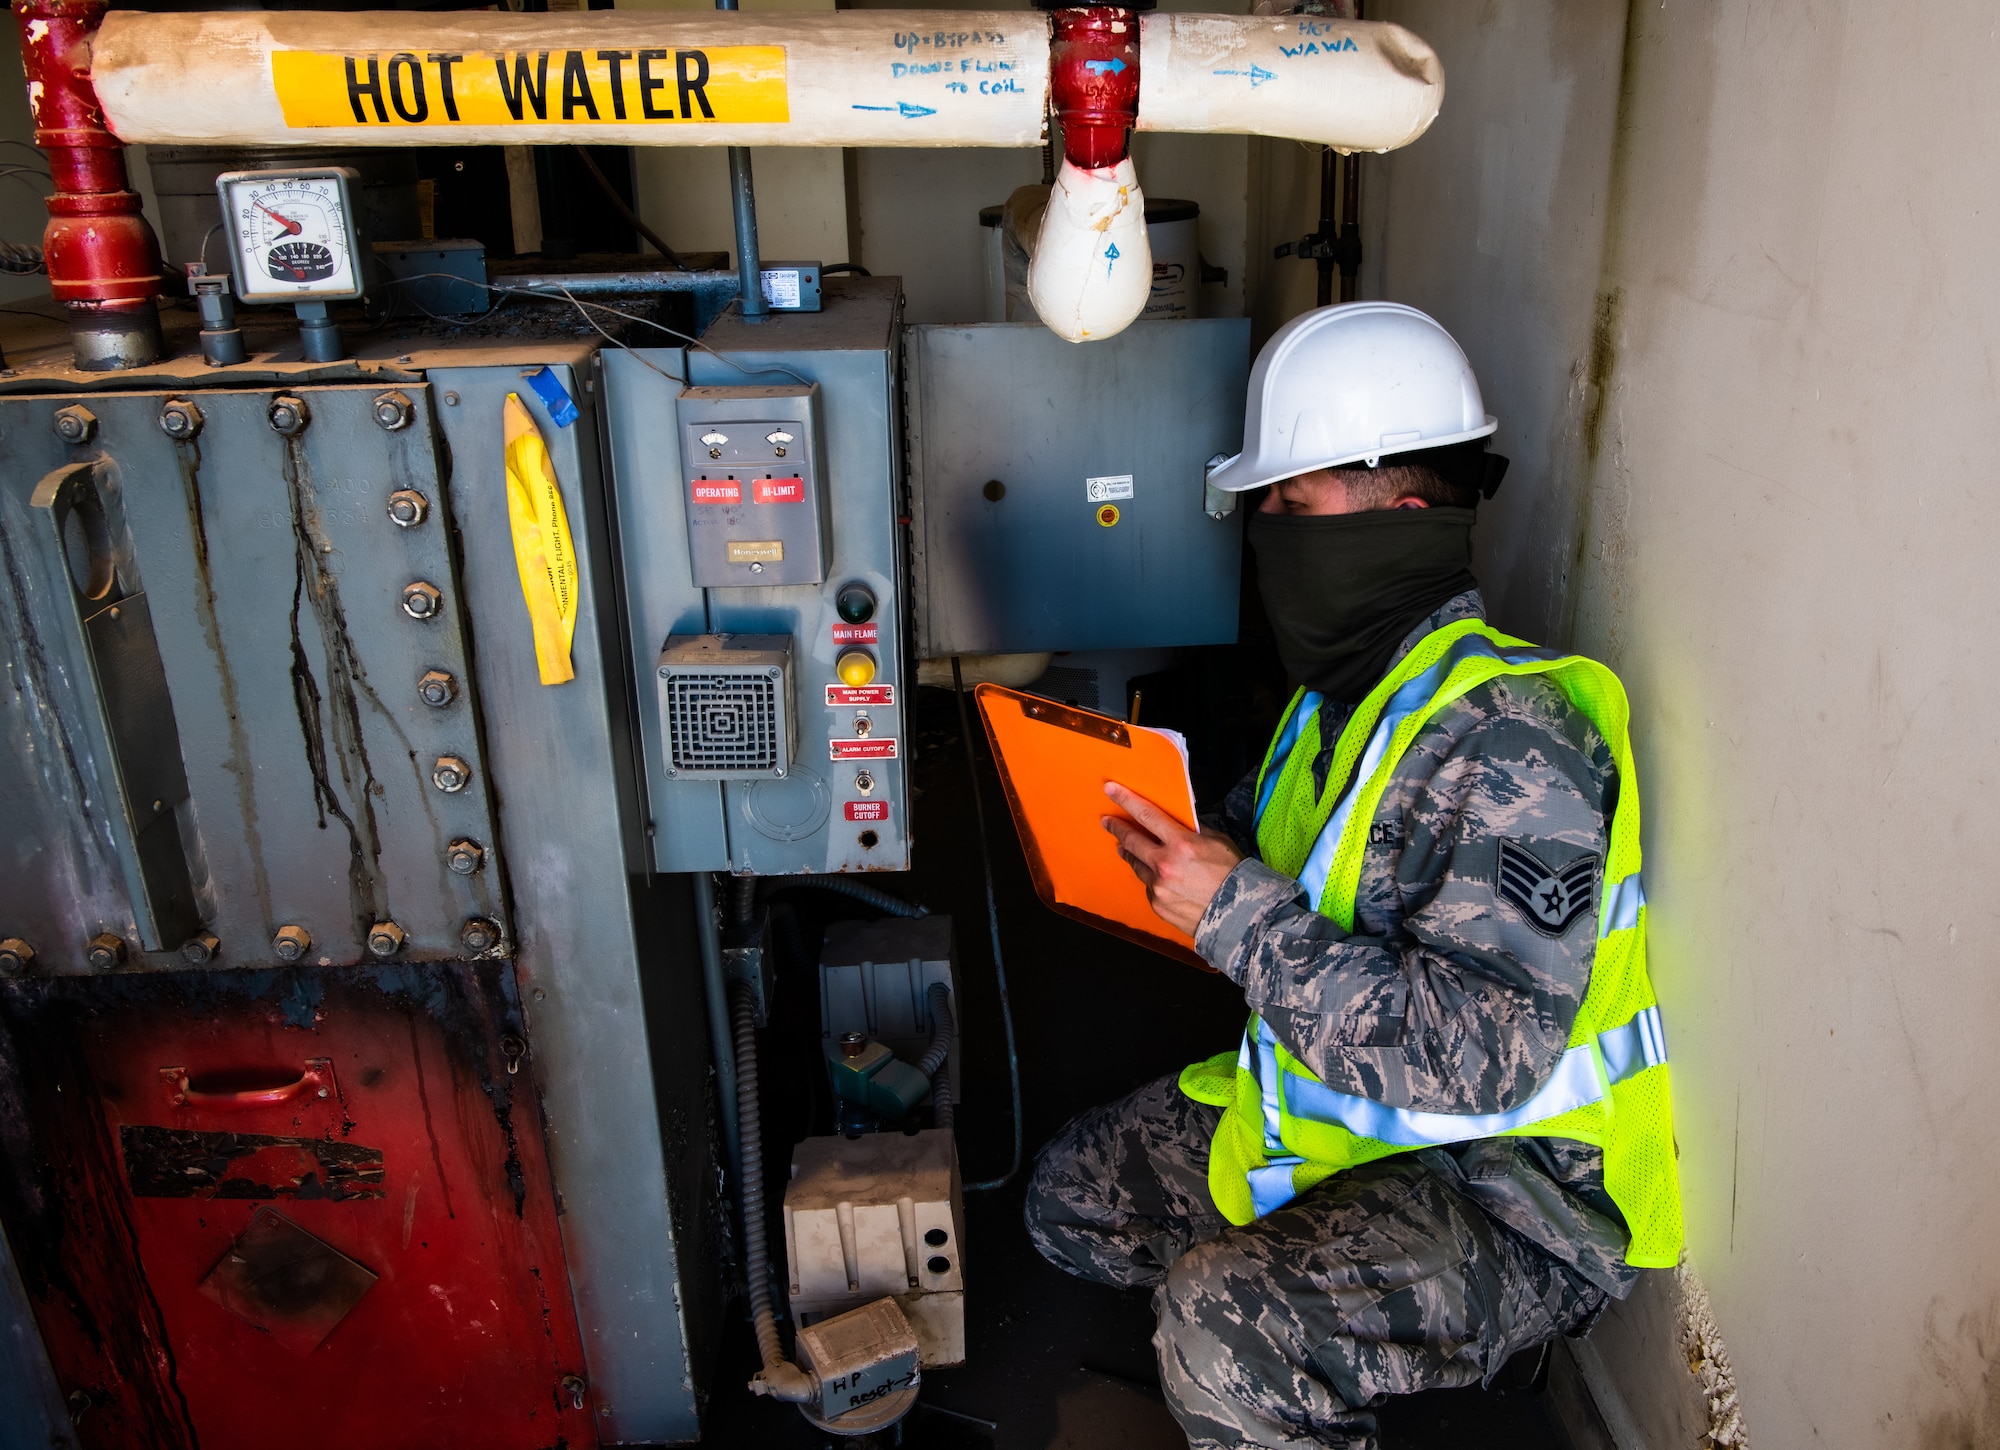 Staff Sgt. Kenny Chung, 56th Civil Engineer Squadron Operations Element heating, ventilation and air conditioning subject matter expert, inventories and inspects HVAC equipment Aug. 11, 2020, at Luke Air Force Base, Ariz.